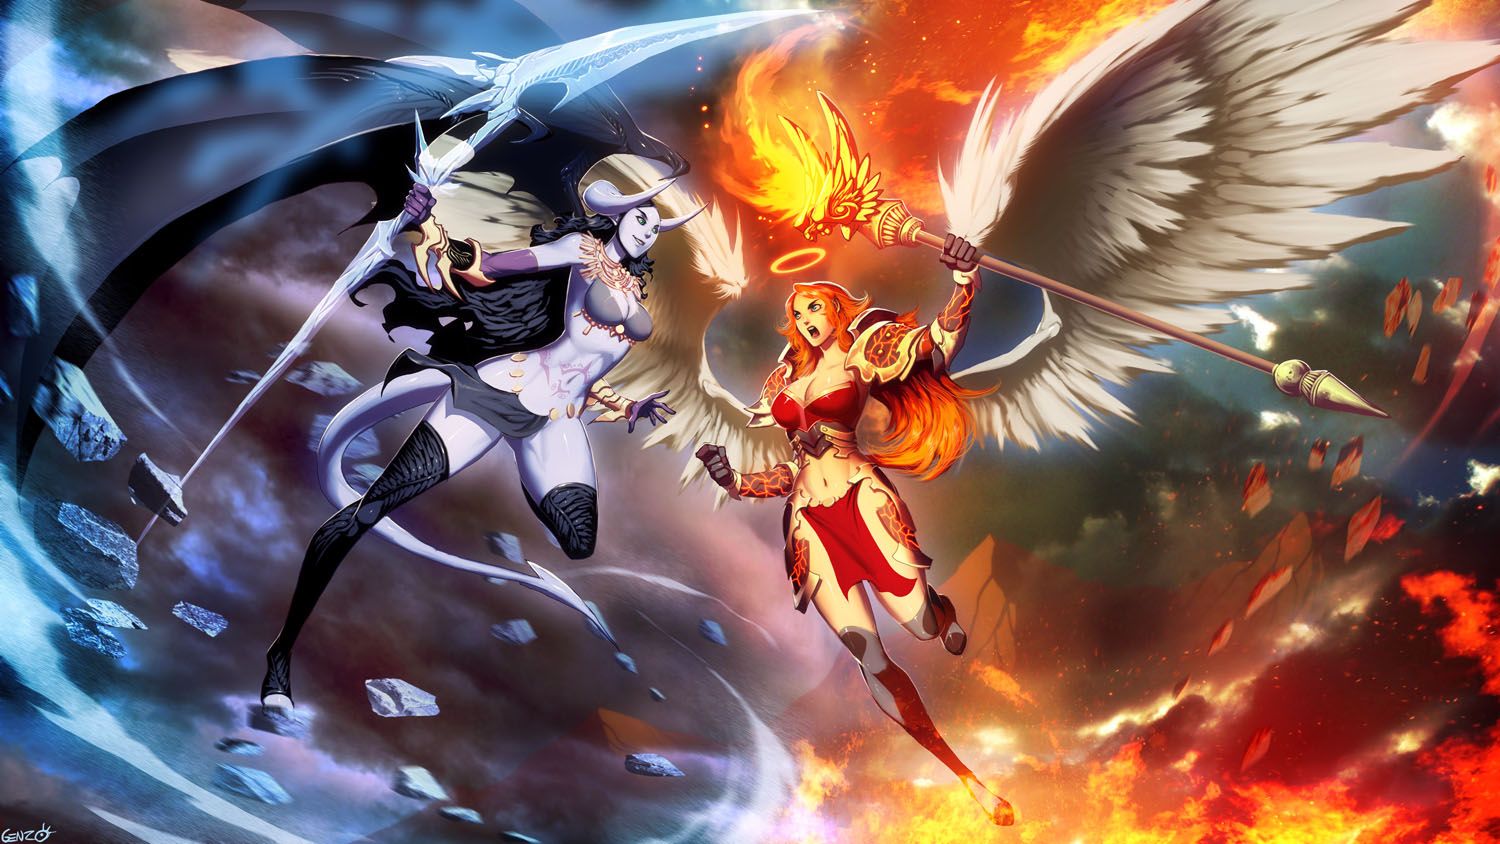 abdul hameed hussain recommends Angels Vs Demons Anime